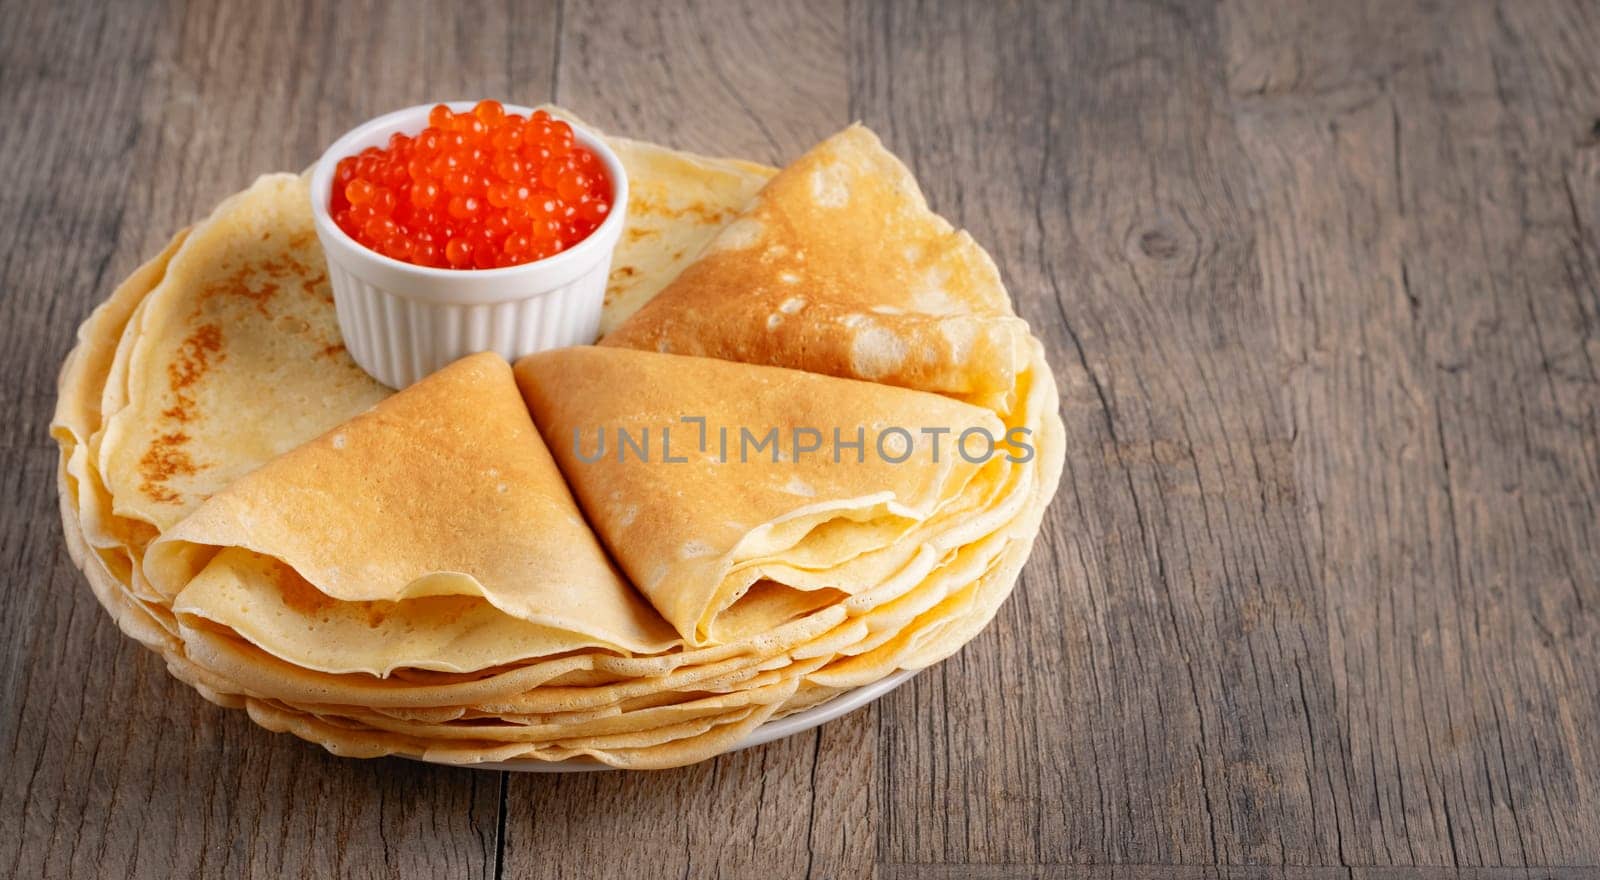 Pancakes with red caviar on a wooden table, with copy space for text.